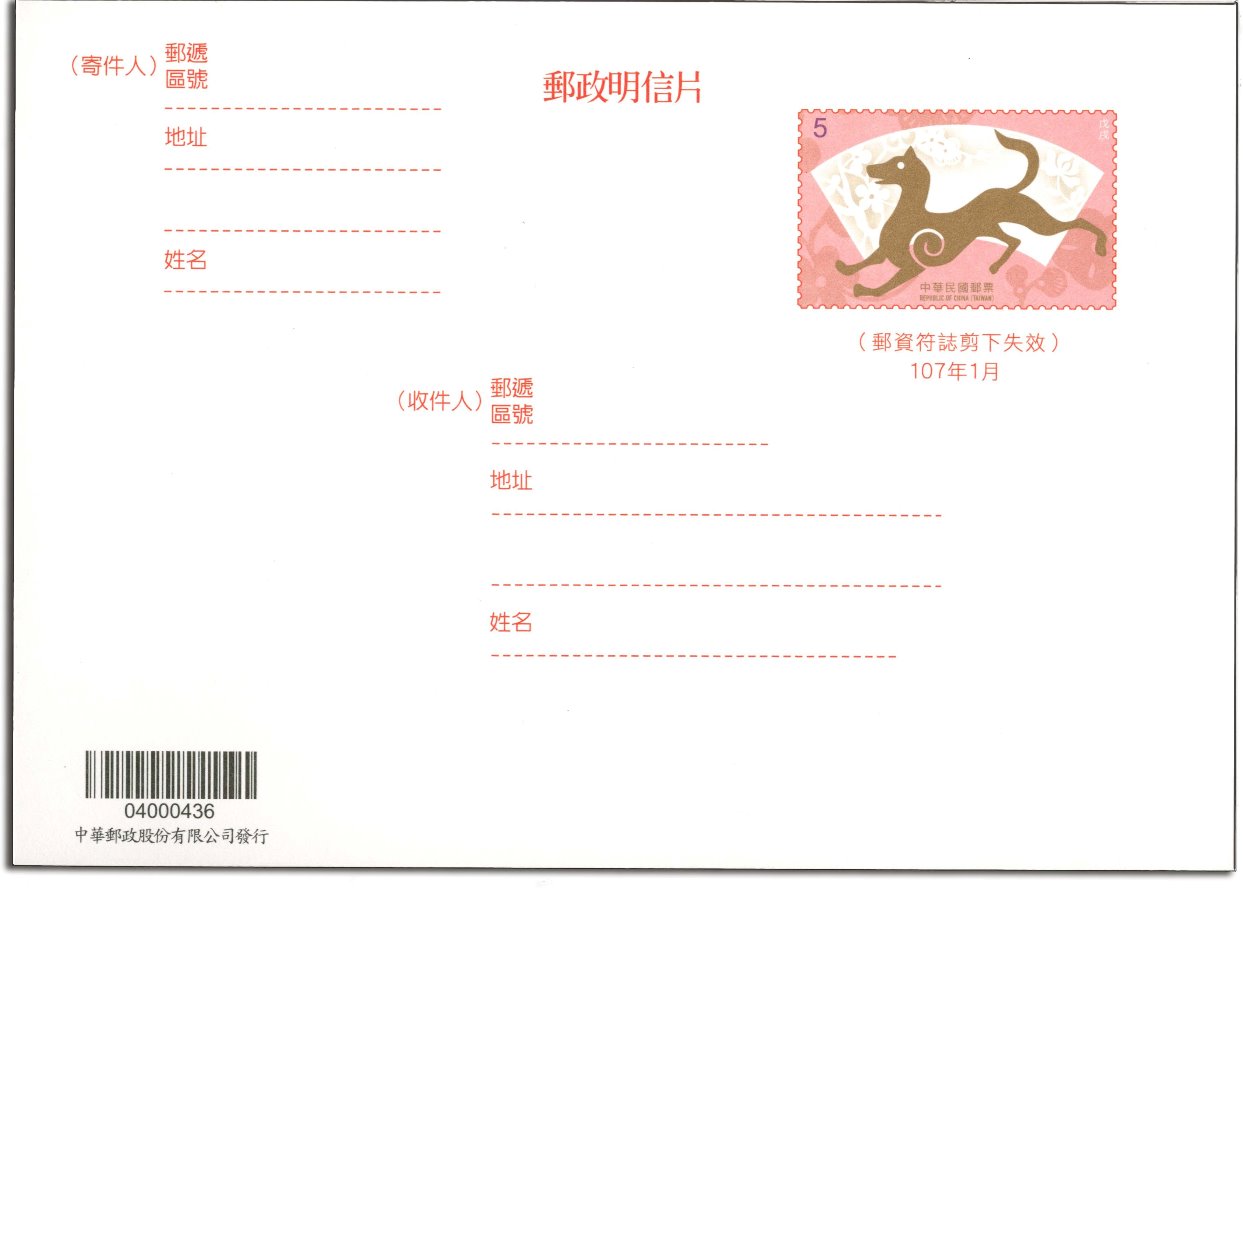 Domestic Stamped Postal Card – Horizontal Type (Issue of 2018)